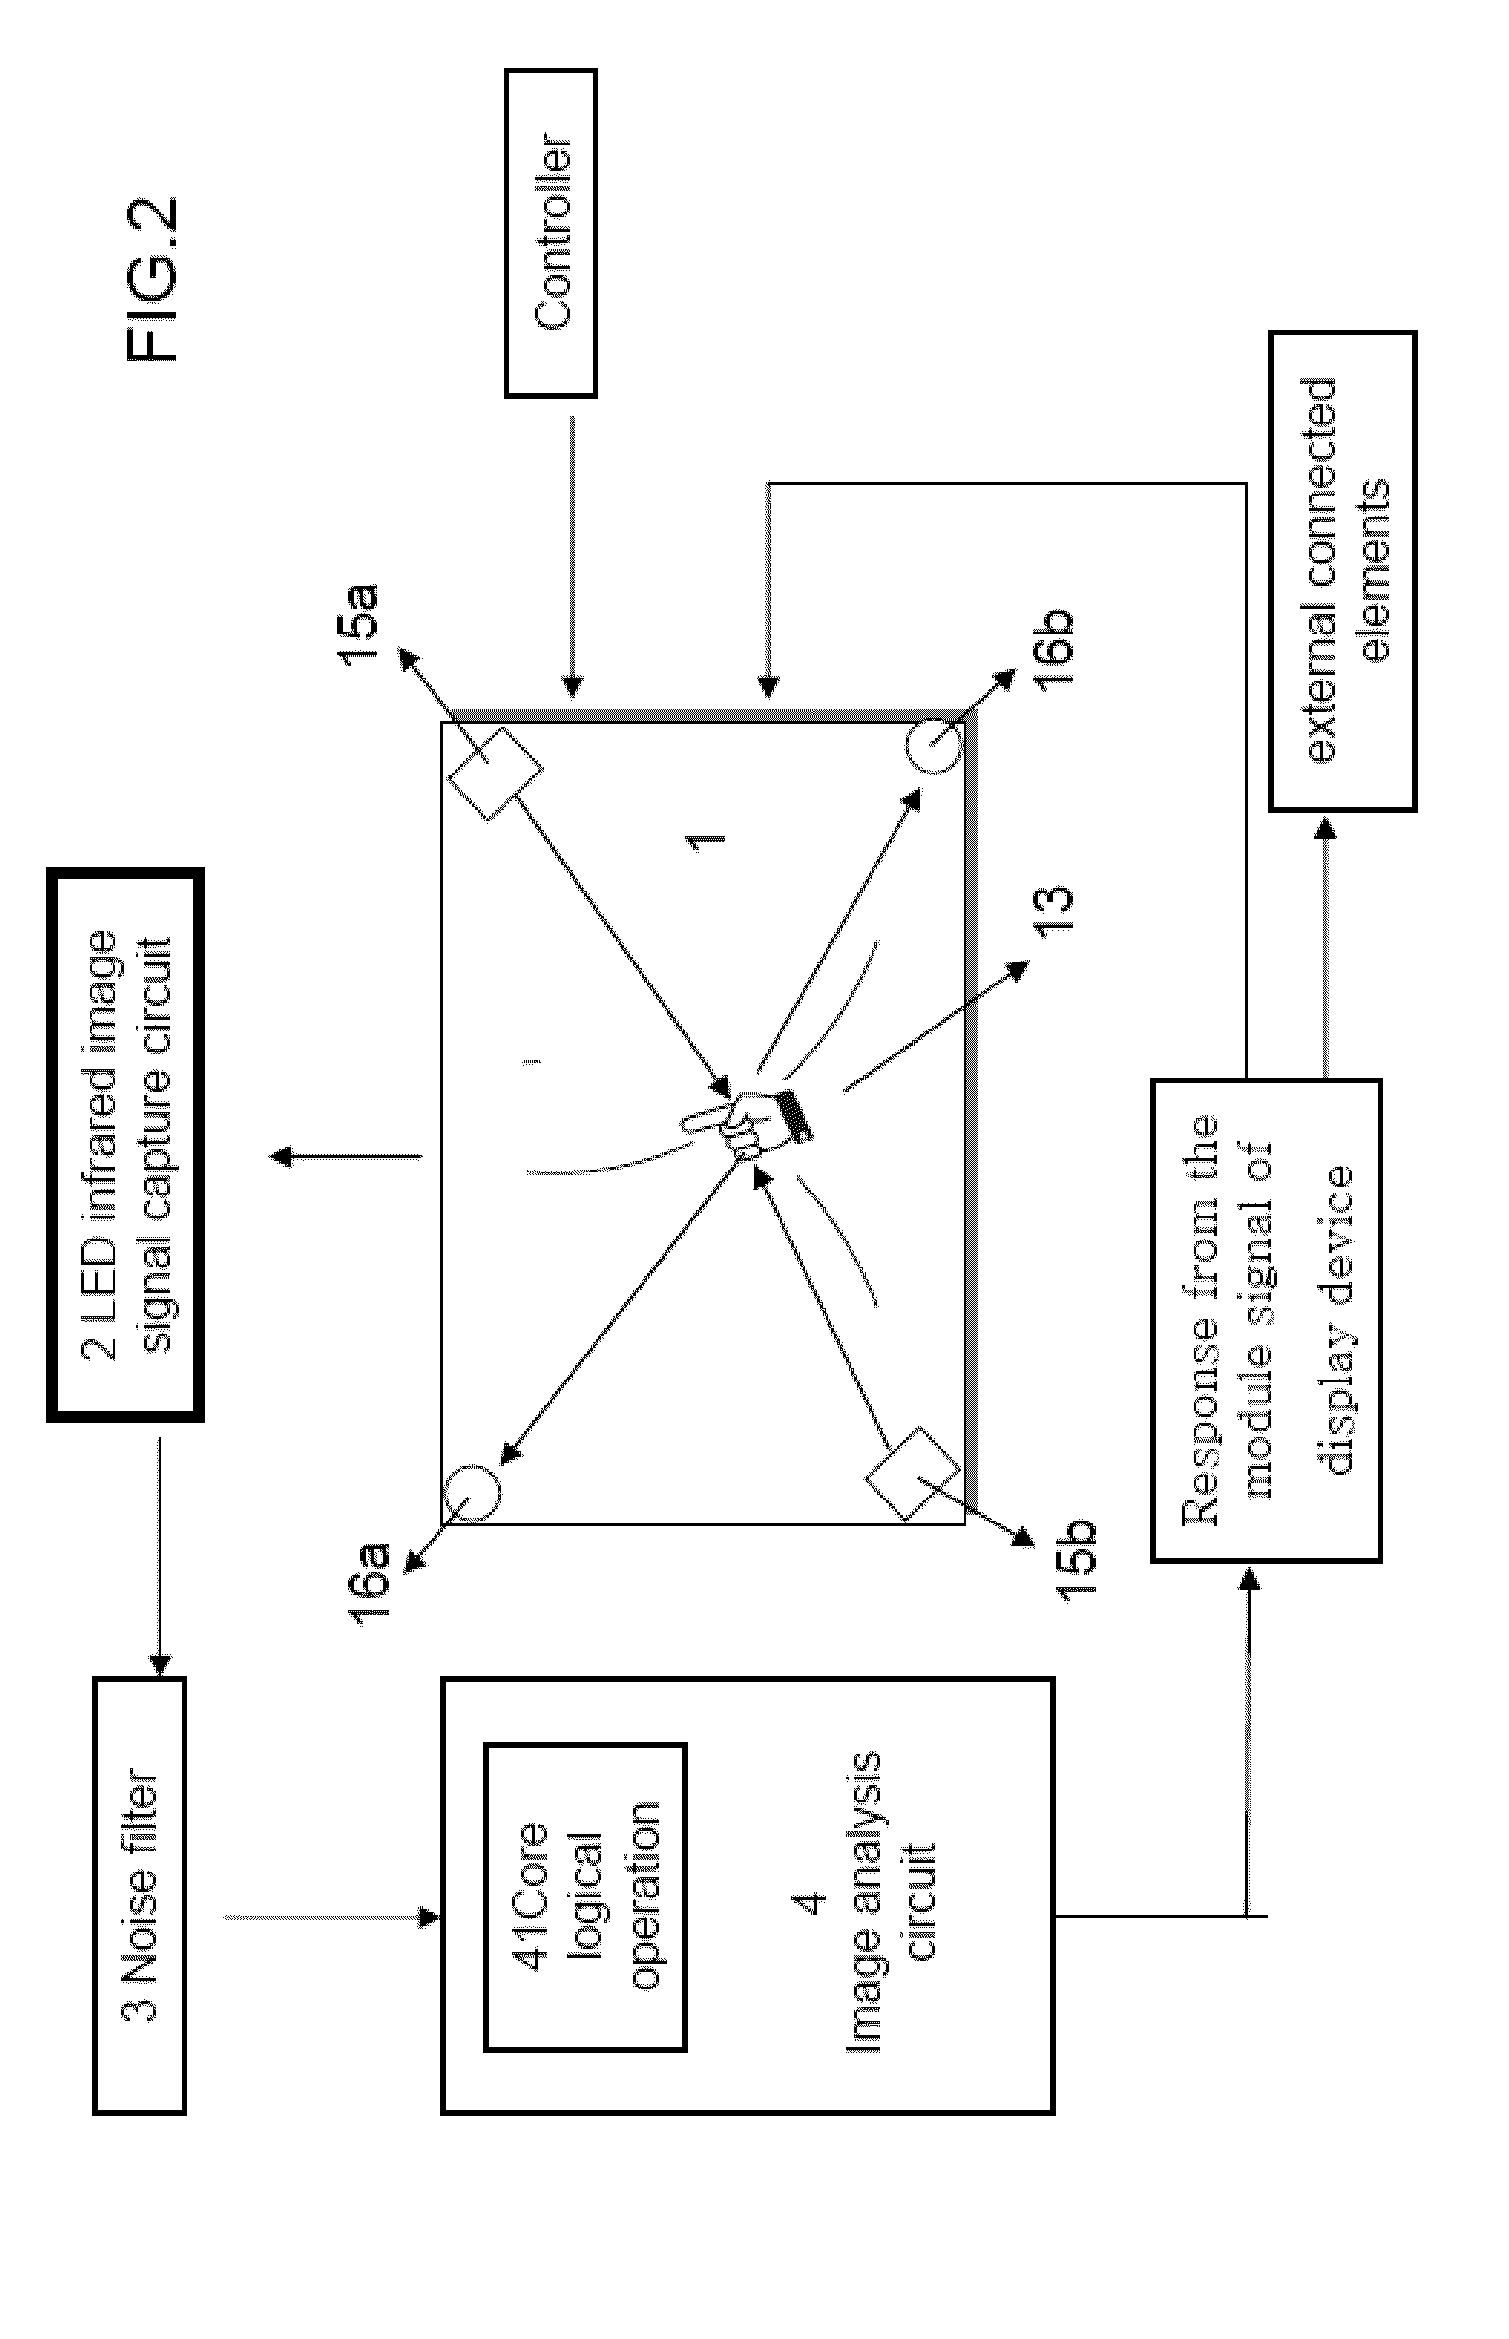 Touch screen system with light reflection